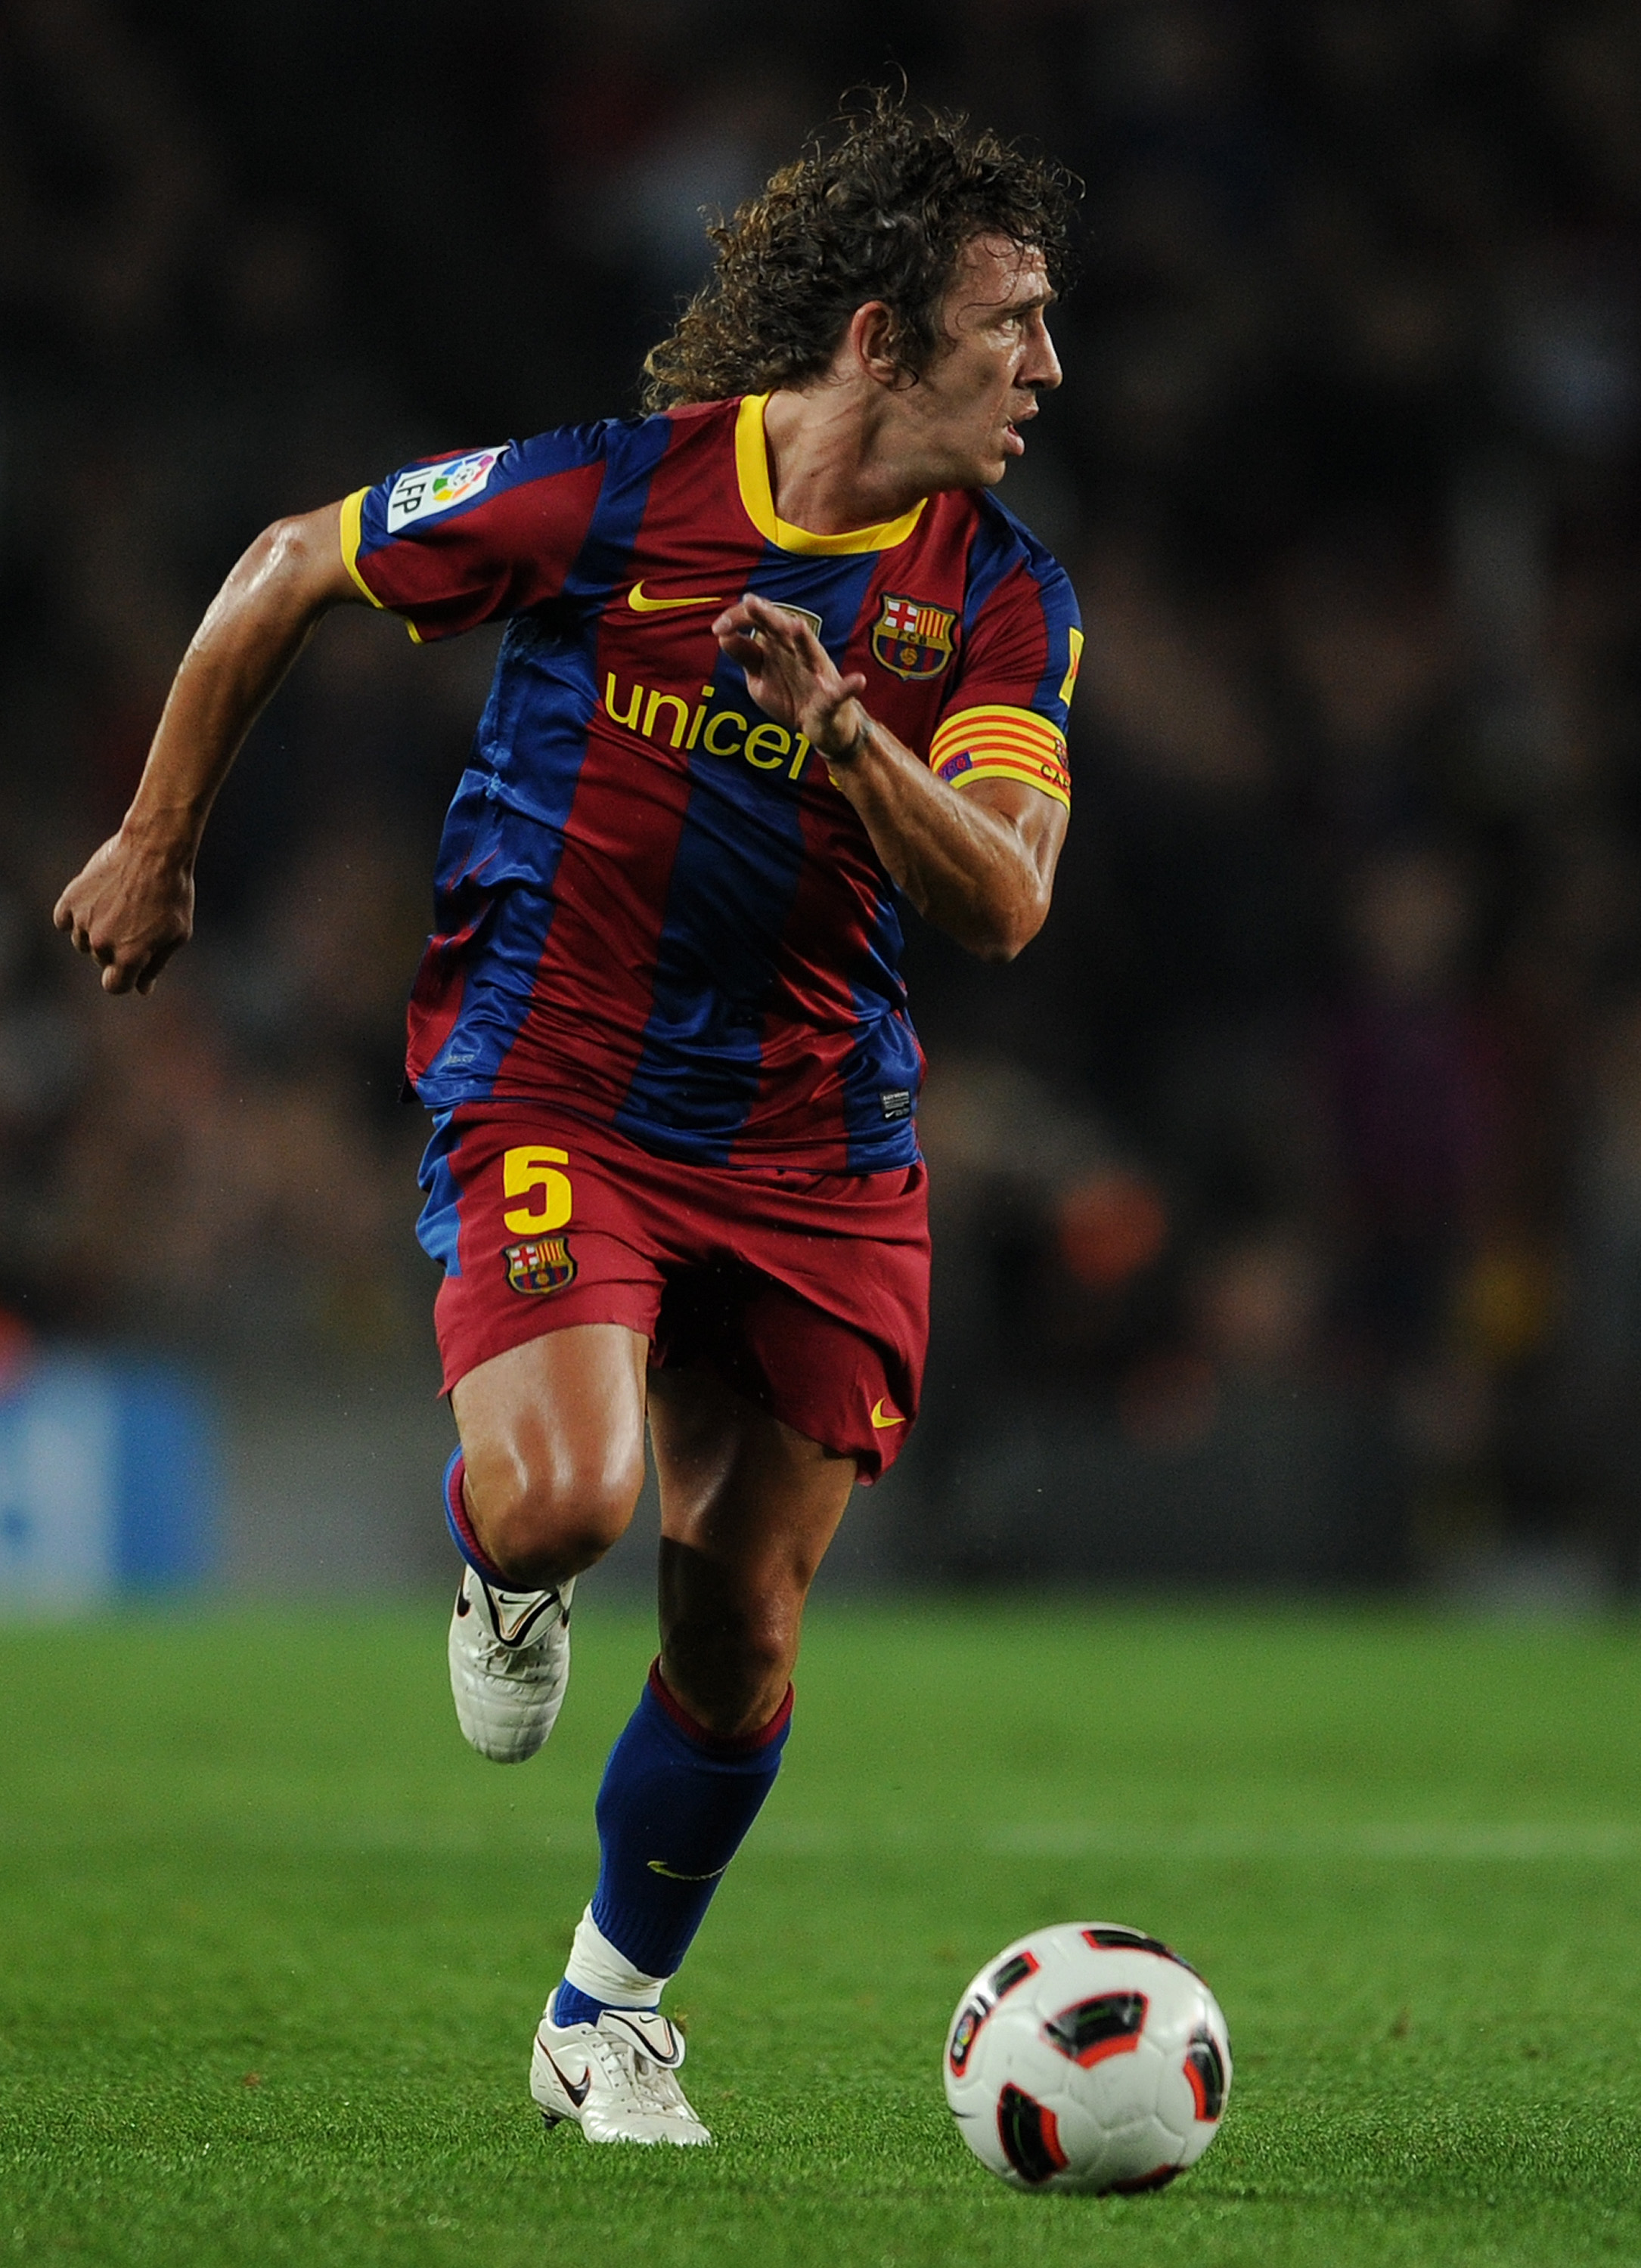 BARCELONA, SPAIN - OCTOBER 16:  Carles Puyol of Barcelona runs with the ball during the La Liga match between Barcelona and Valencia at the Camp Nou stadium on October 16, 2010 in Barcelona, Spain. Barcelona won the match 2-1.  (Photo by Jasper Juinen/Get